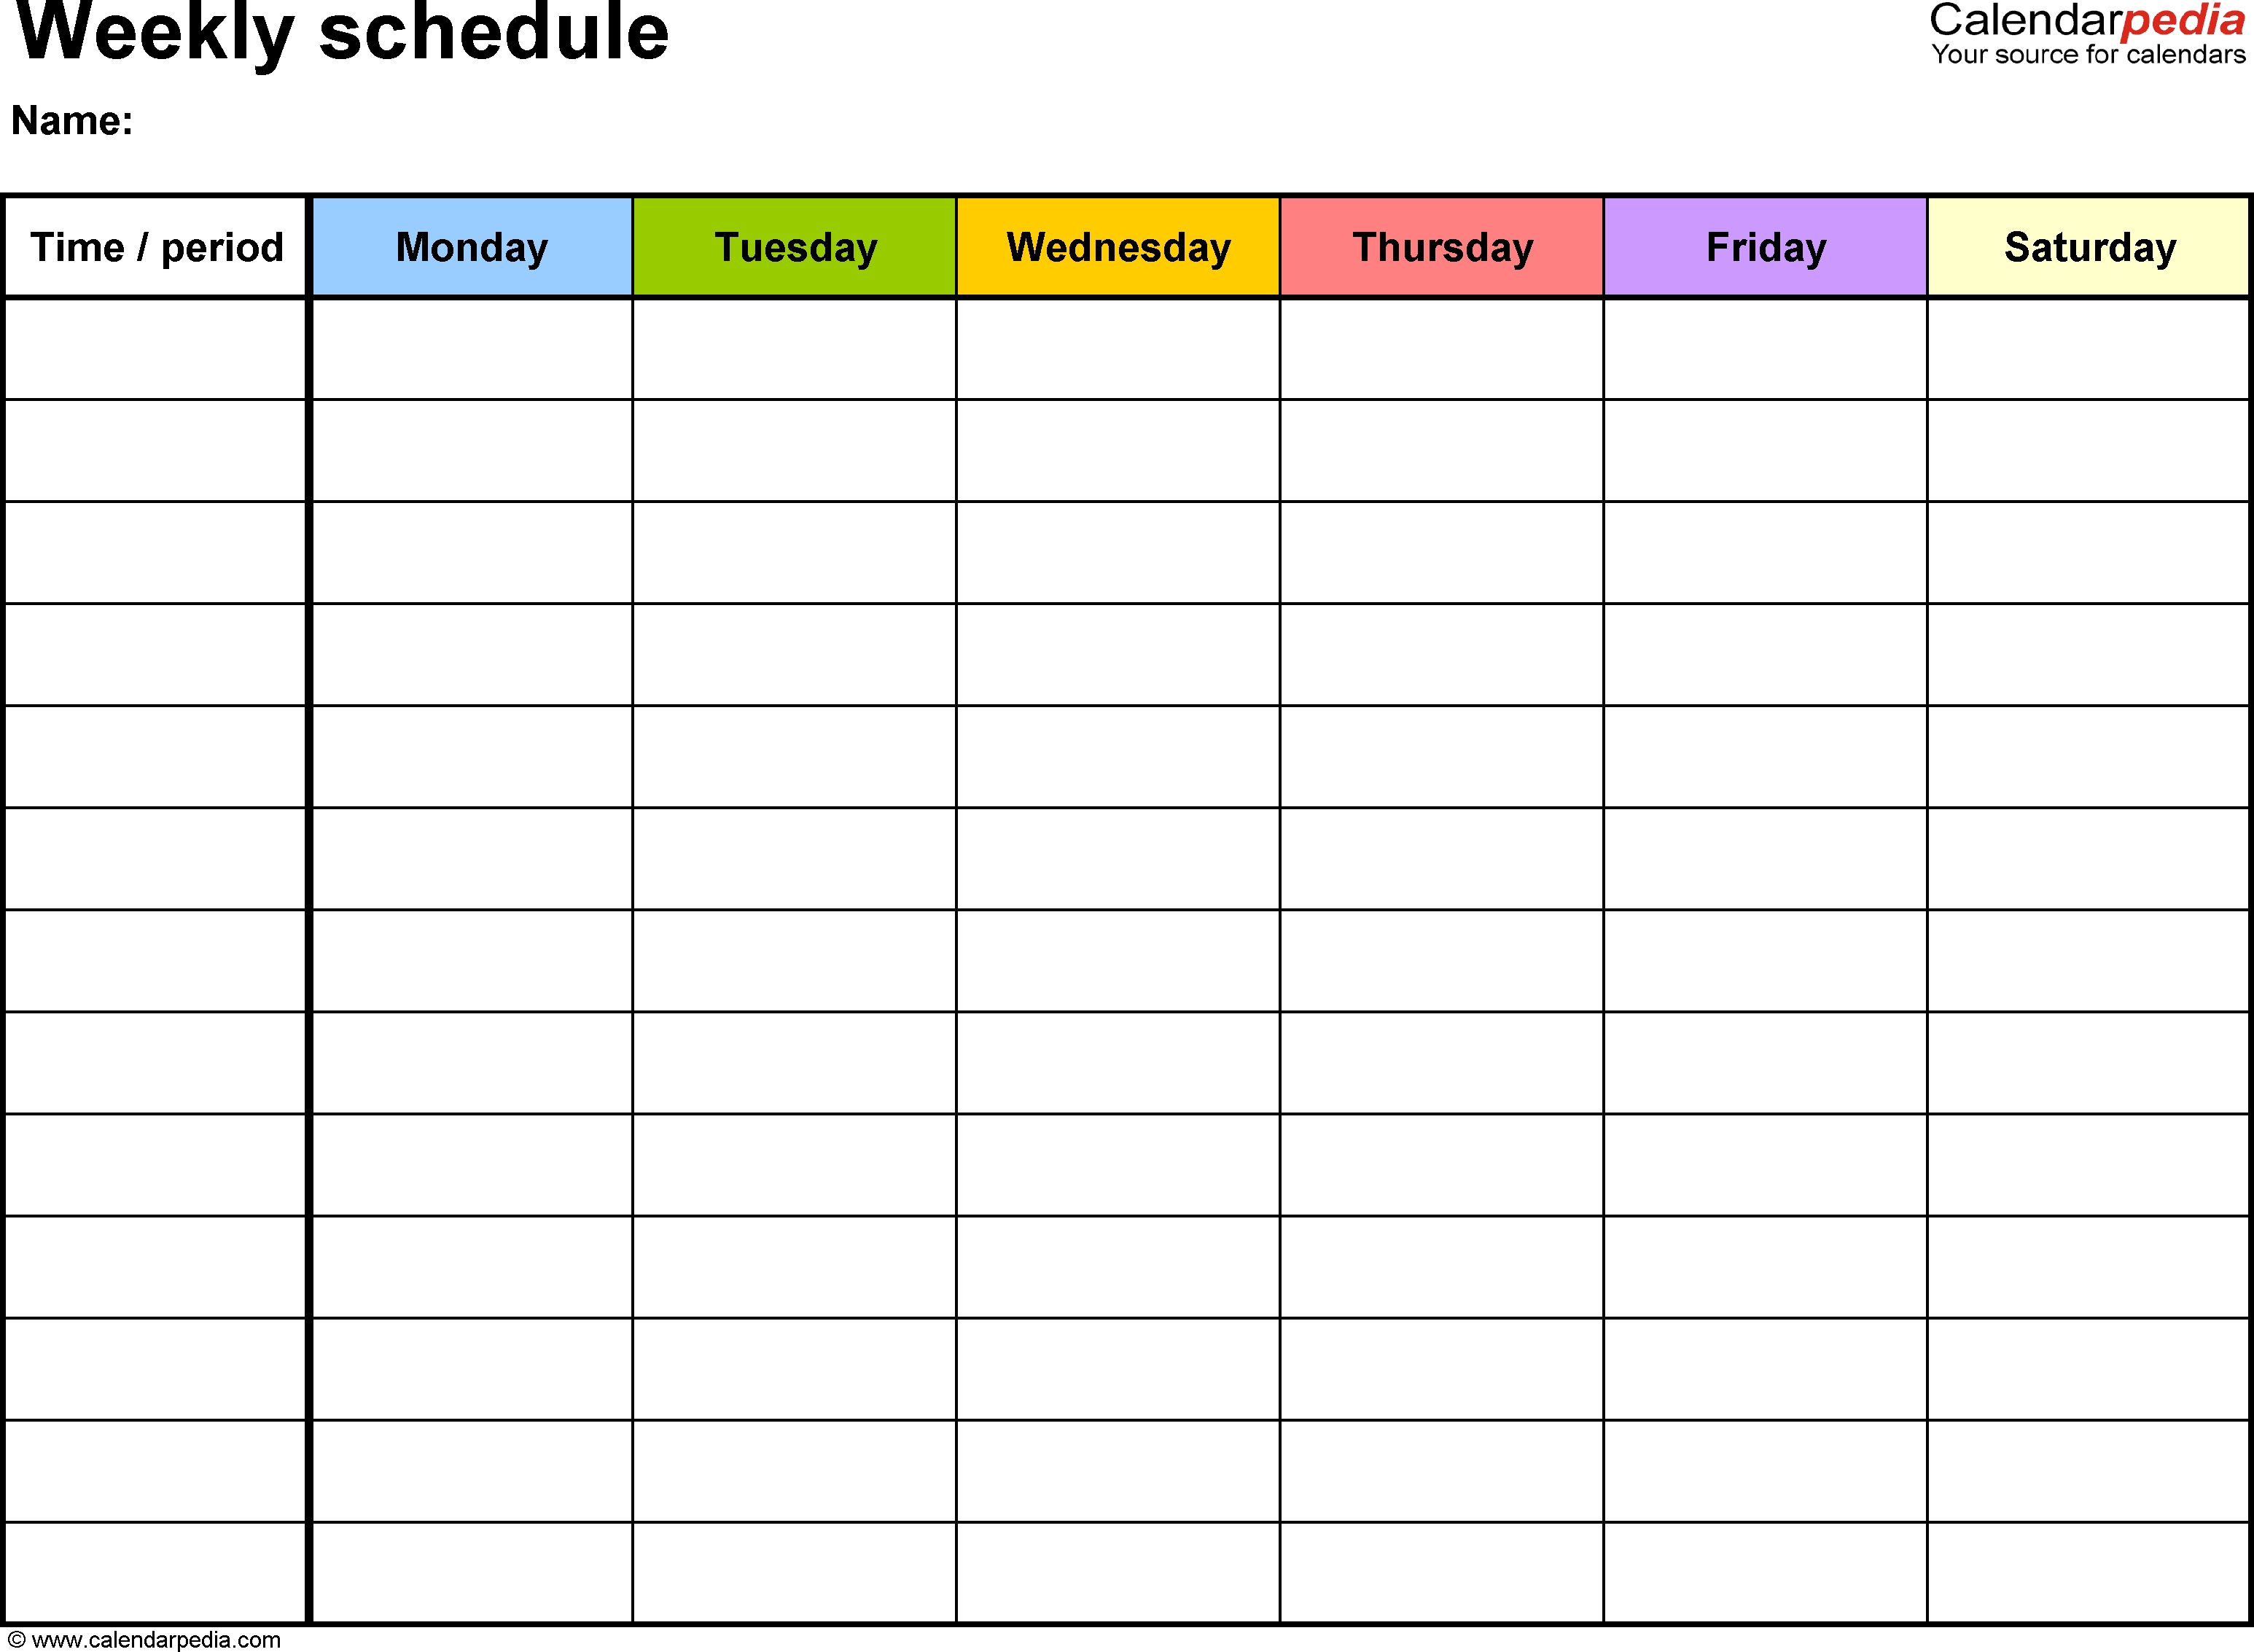 Free Weekly Schedule Templates For Word - 18 Templates 5 Day Calendar Blank